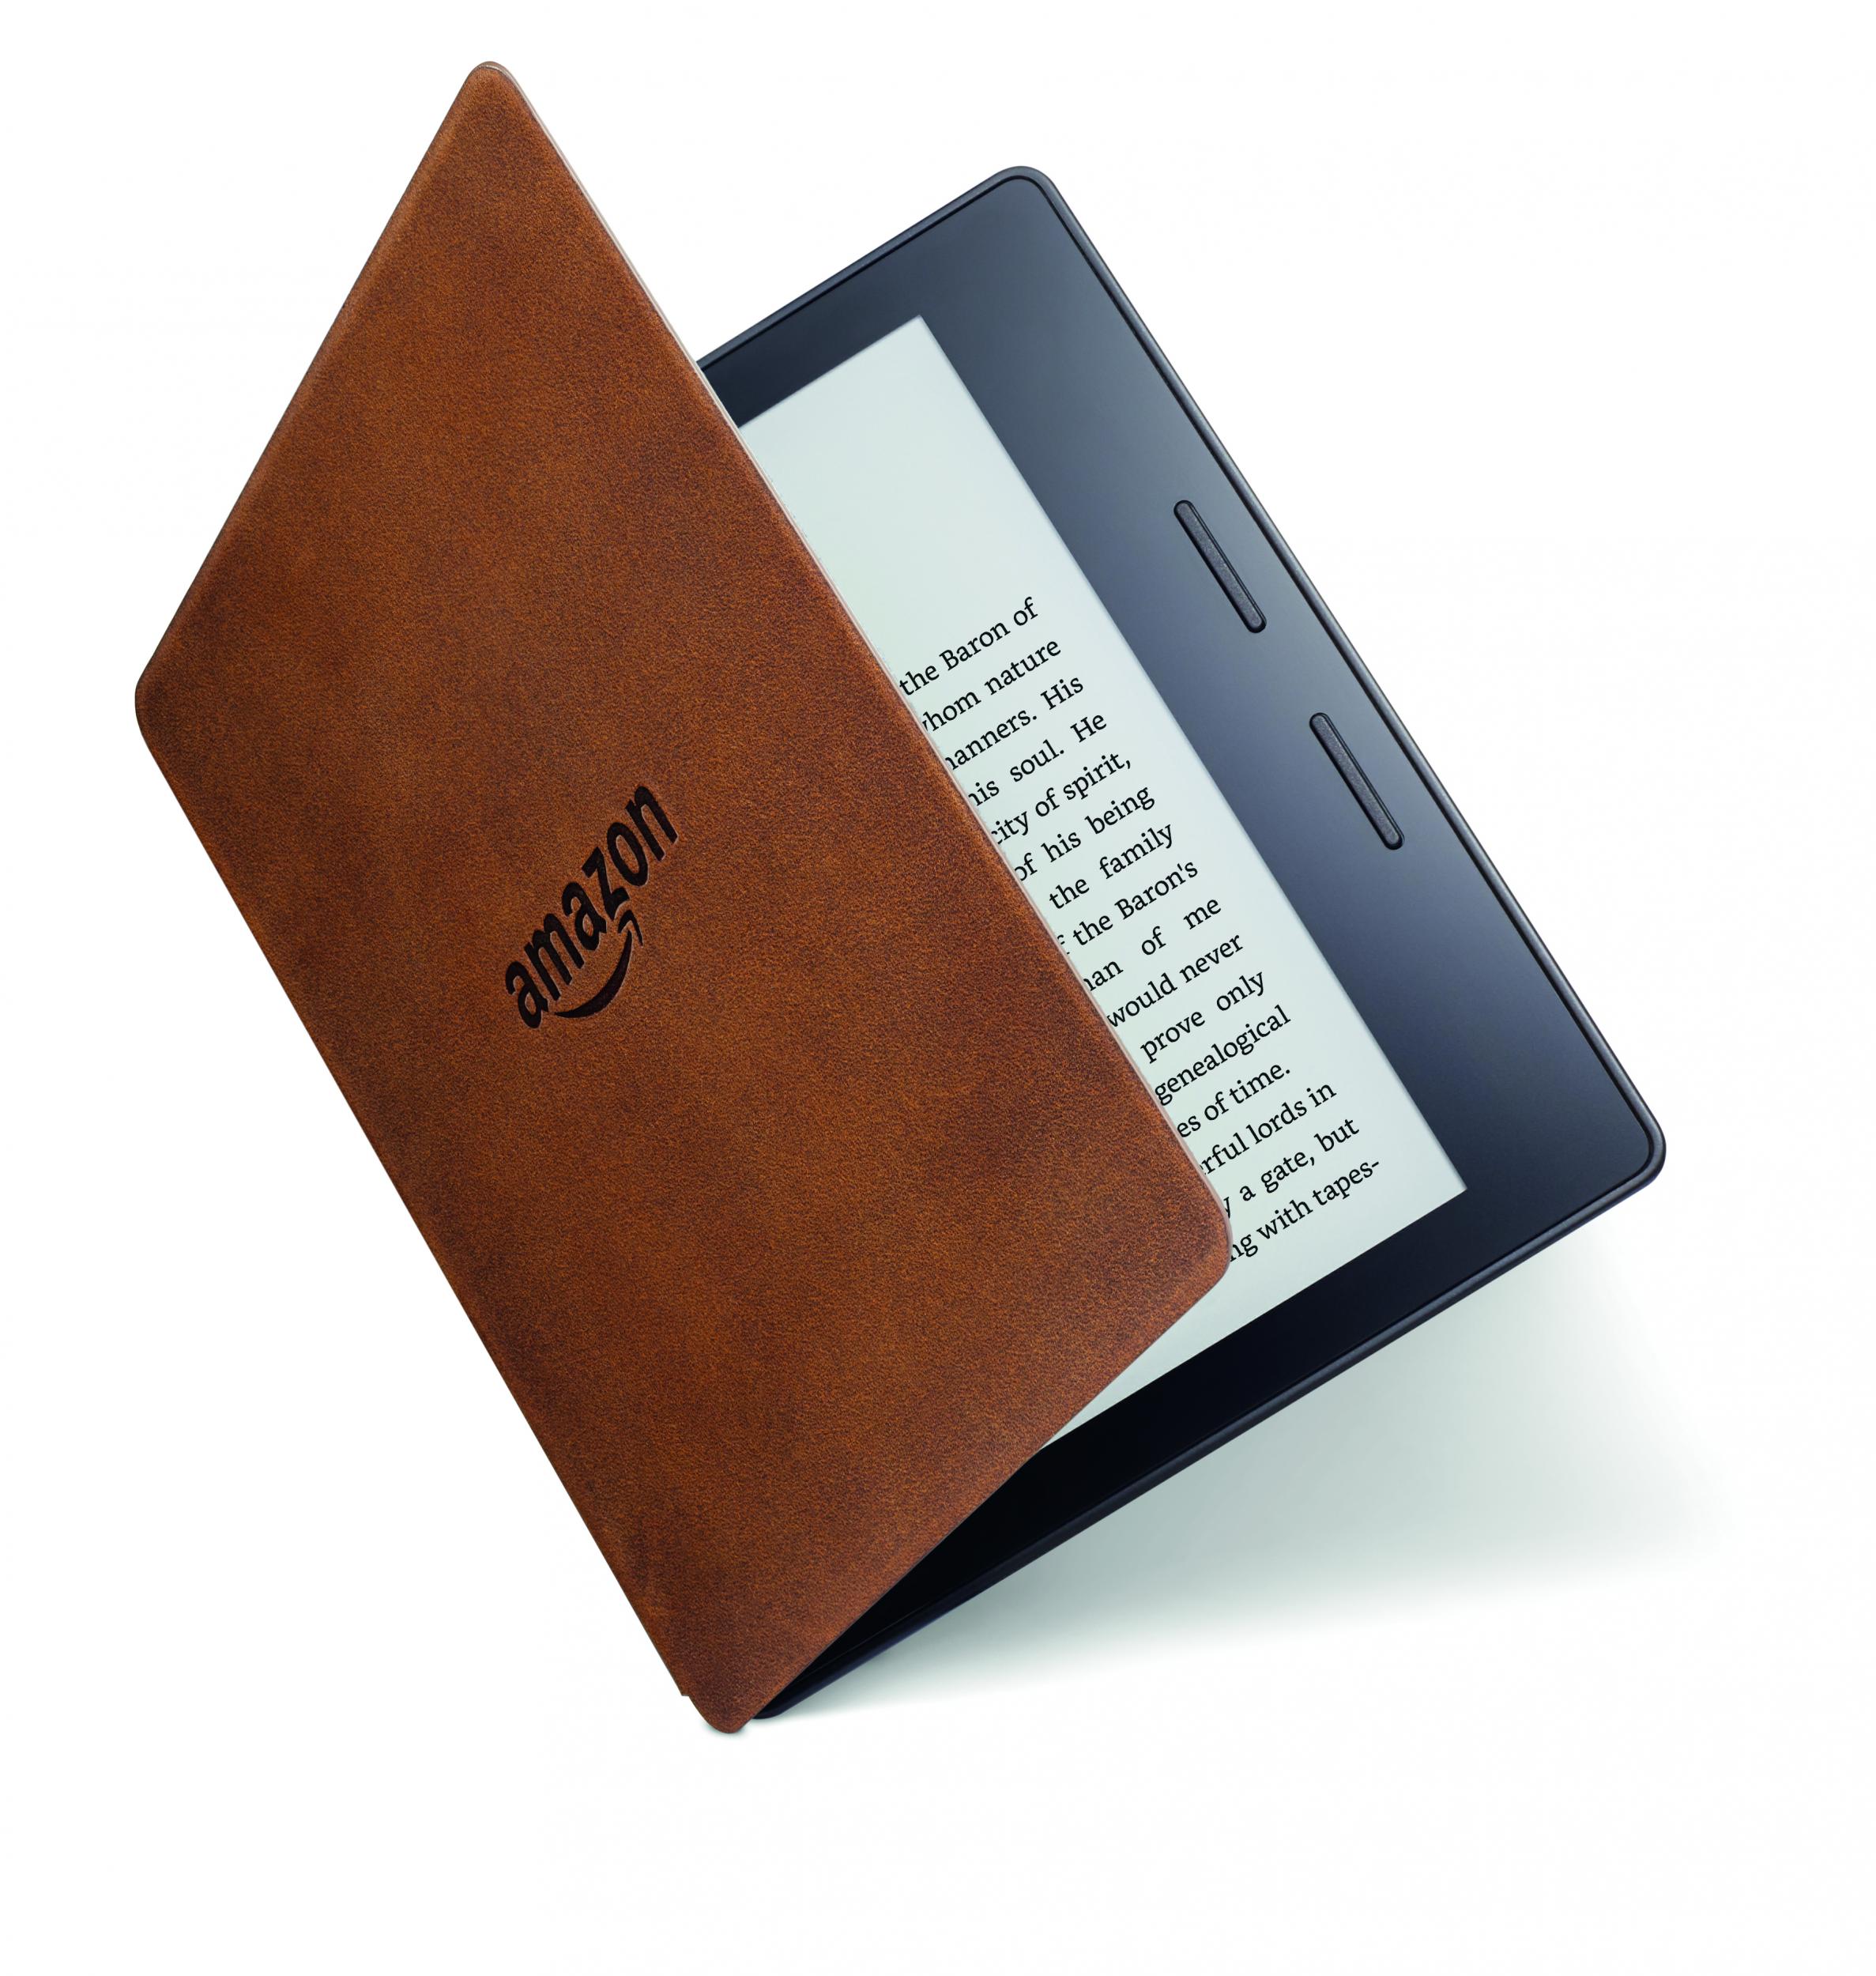 The Kindle Oasis is razor-thin, but feels strong